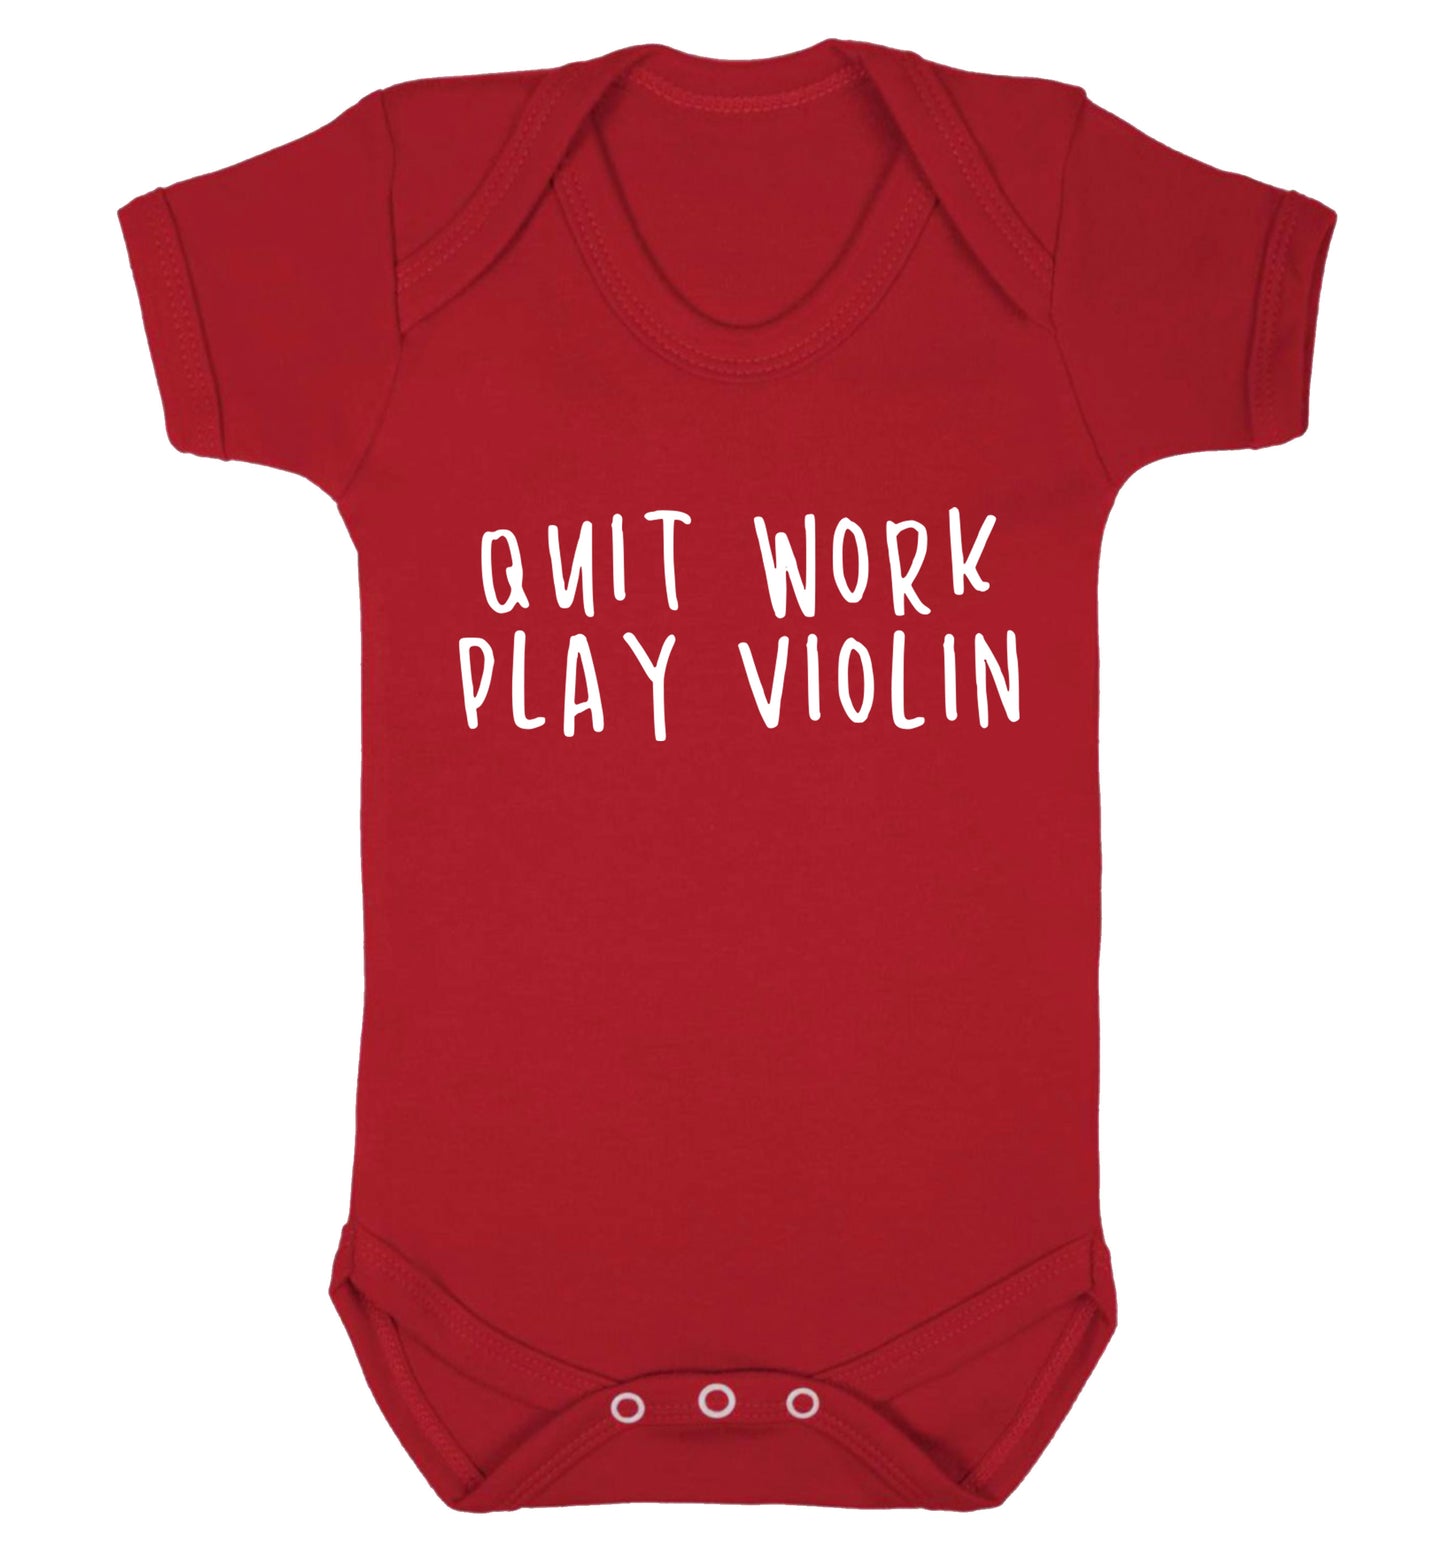 Quit work play violin Baby Vest red 18-24 months